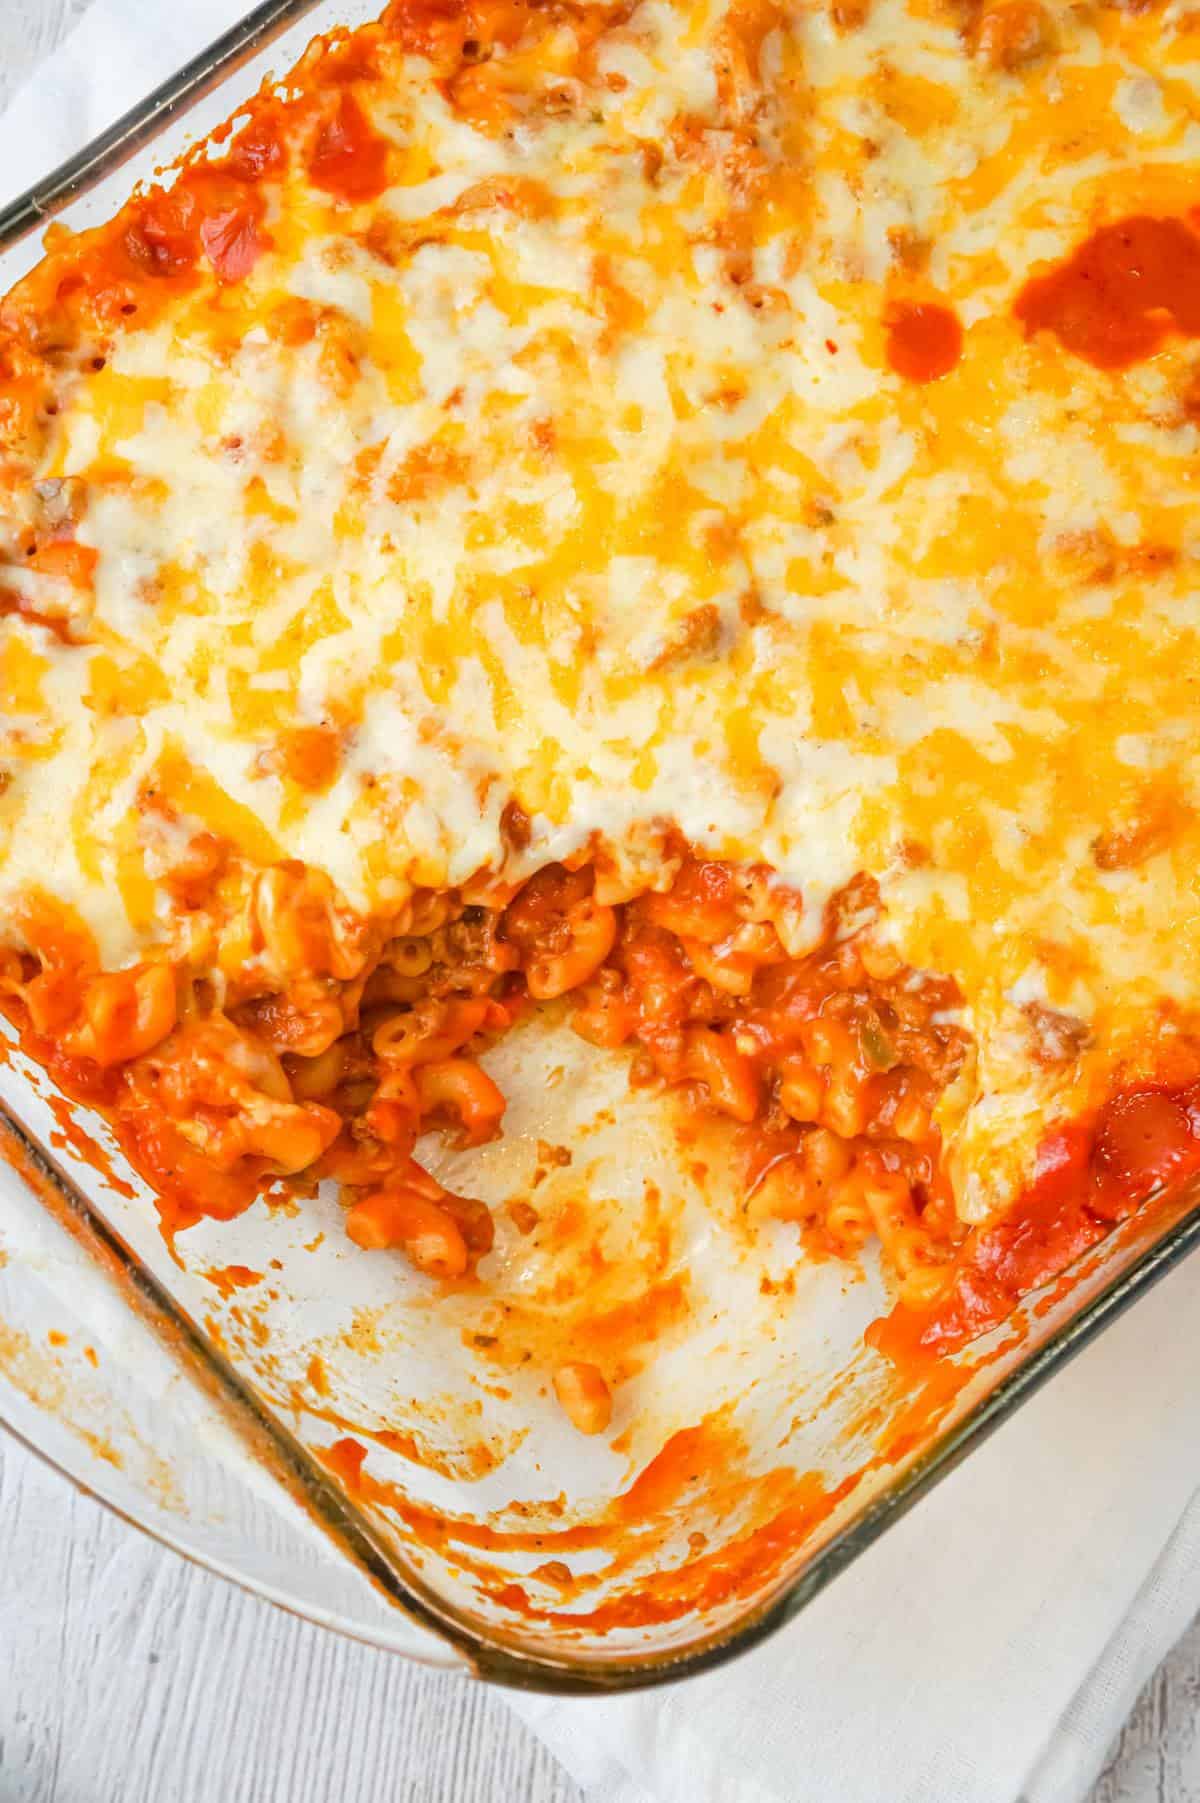 Baked Chili Mac and Cheese is an easy pasta recipe loaded with ground beef, tomato sauce, salsa and a shredded Tex Mex cheese blend.